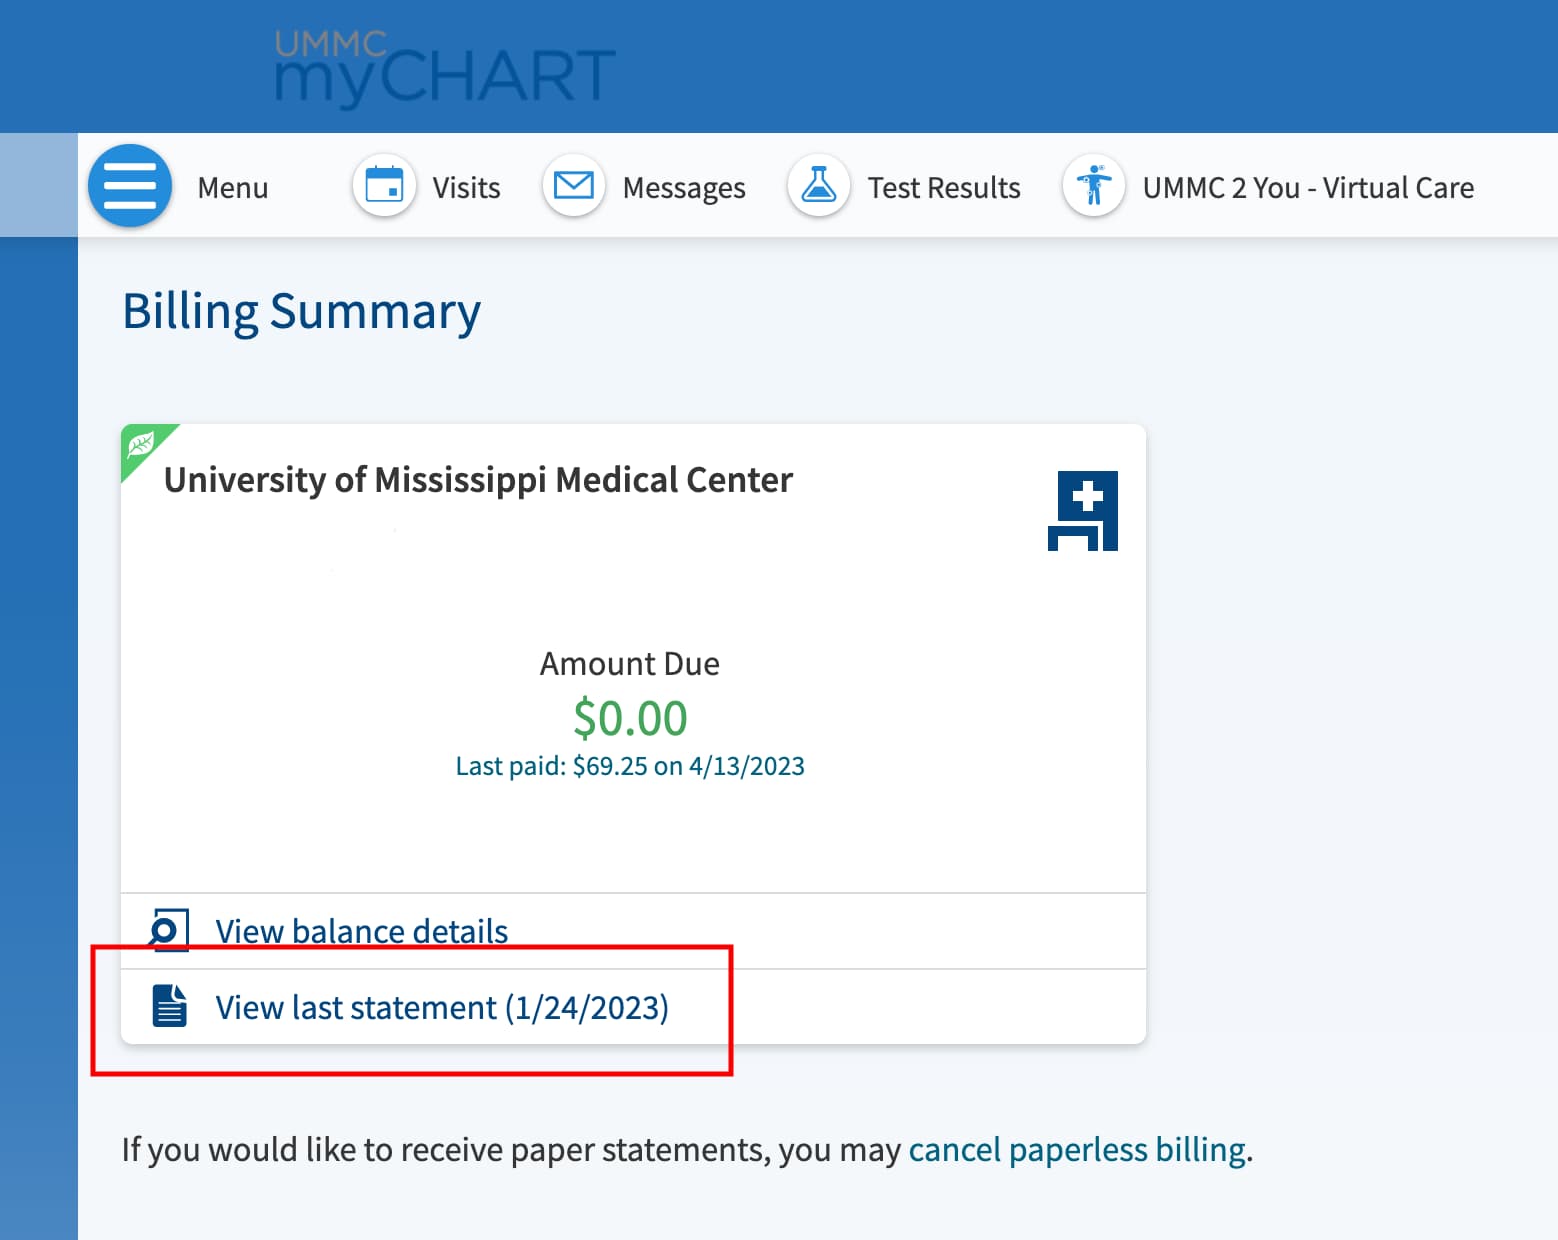 A screenshot of the MyChart Billing Summary shows the link to View Last Statement on the left side of the screen.